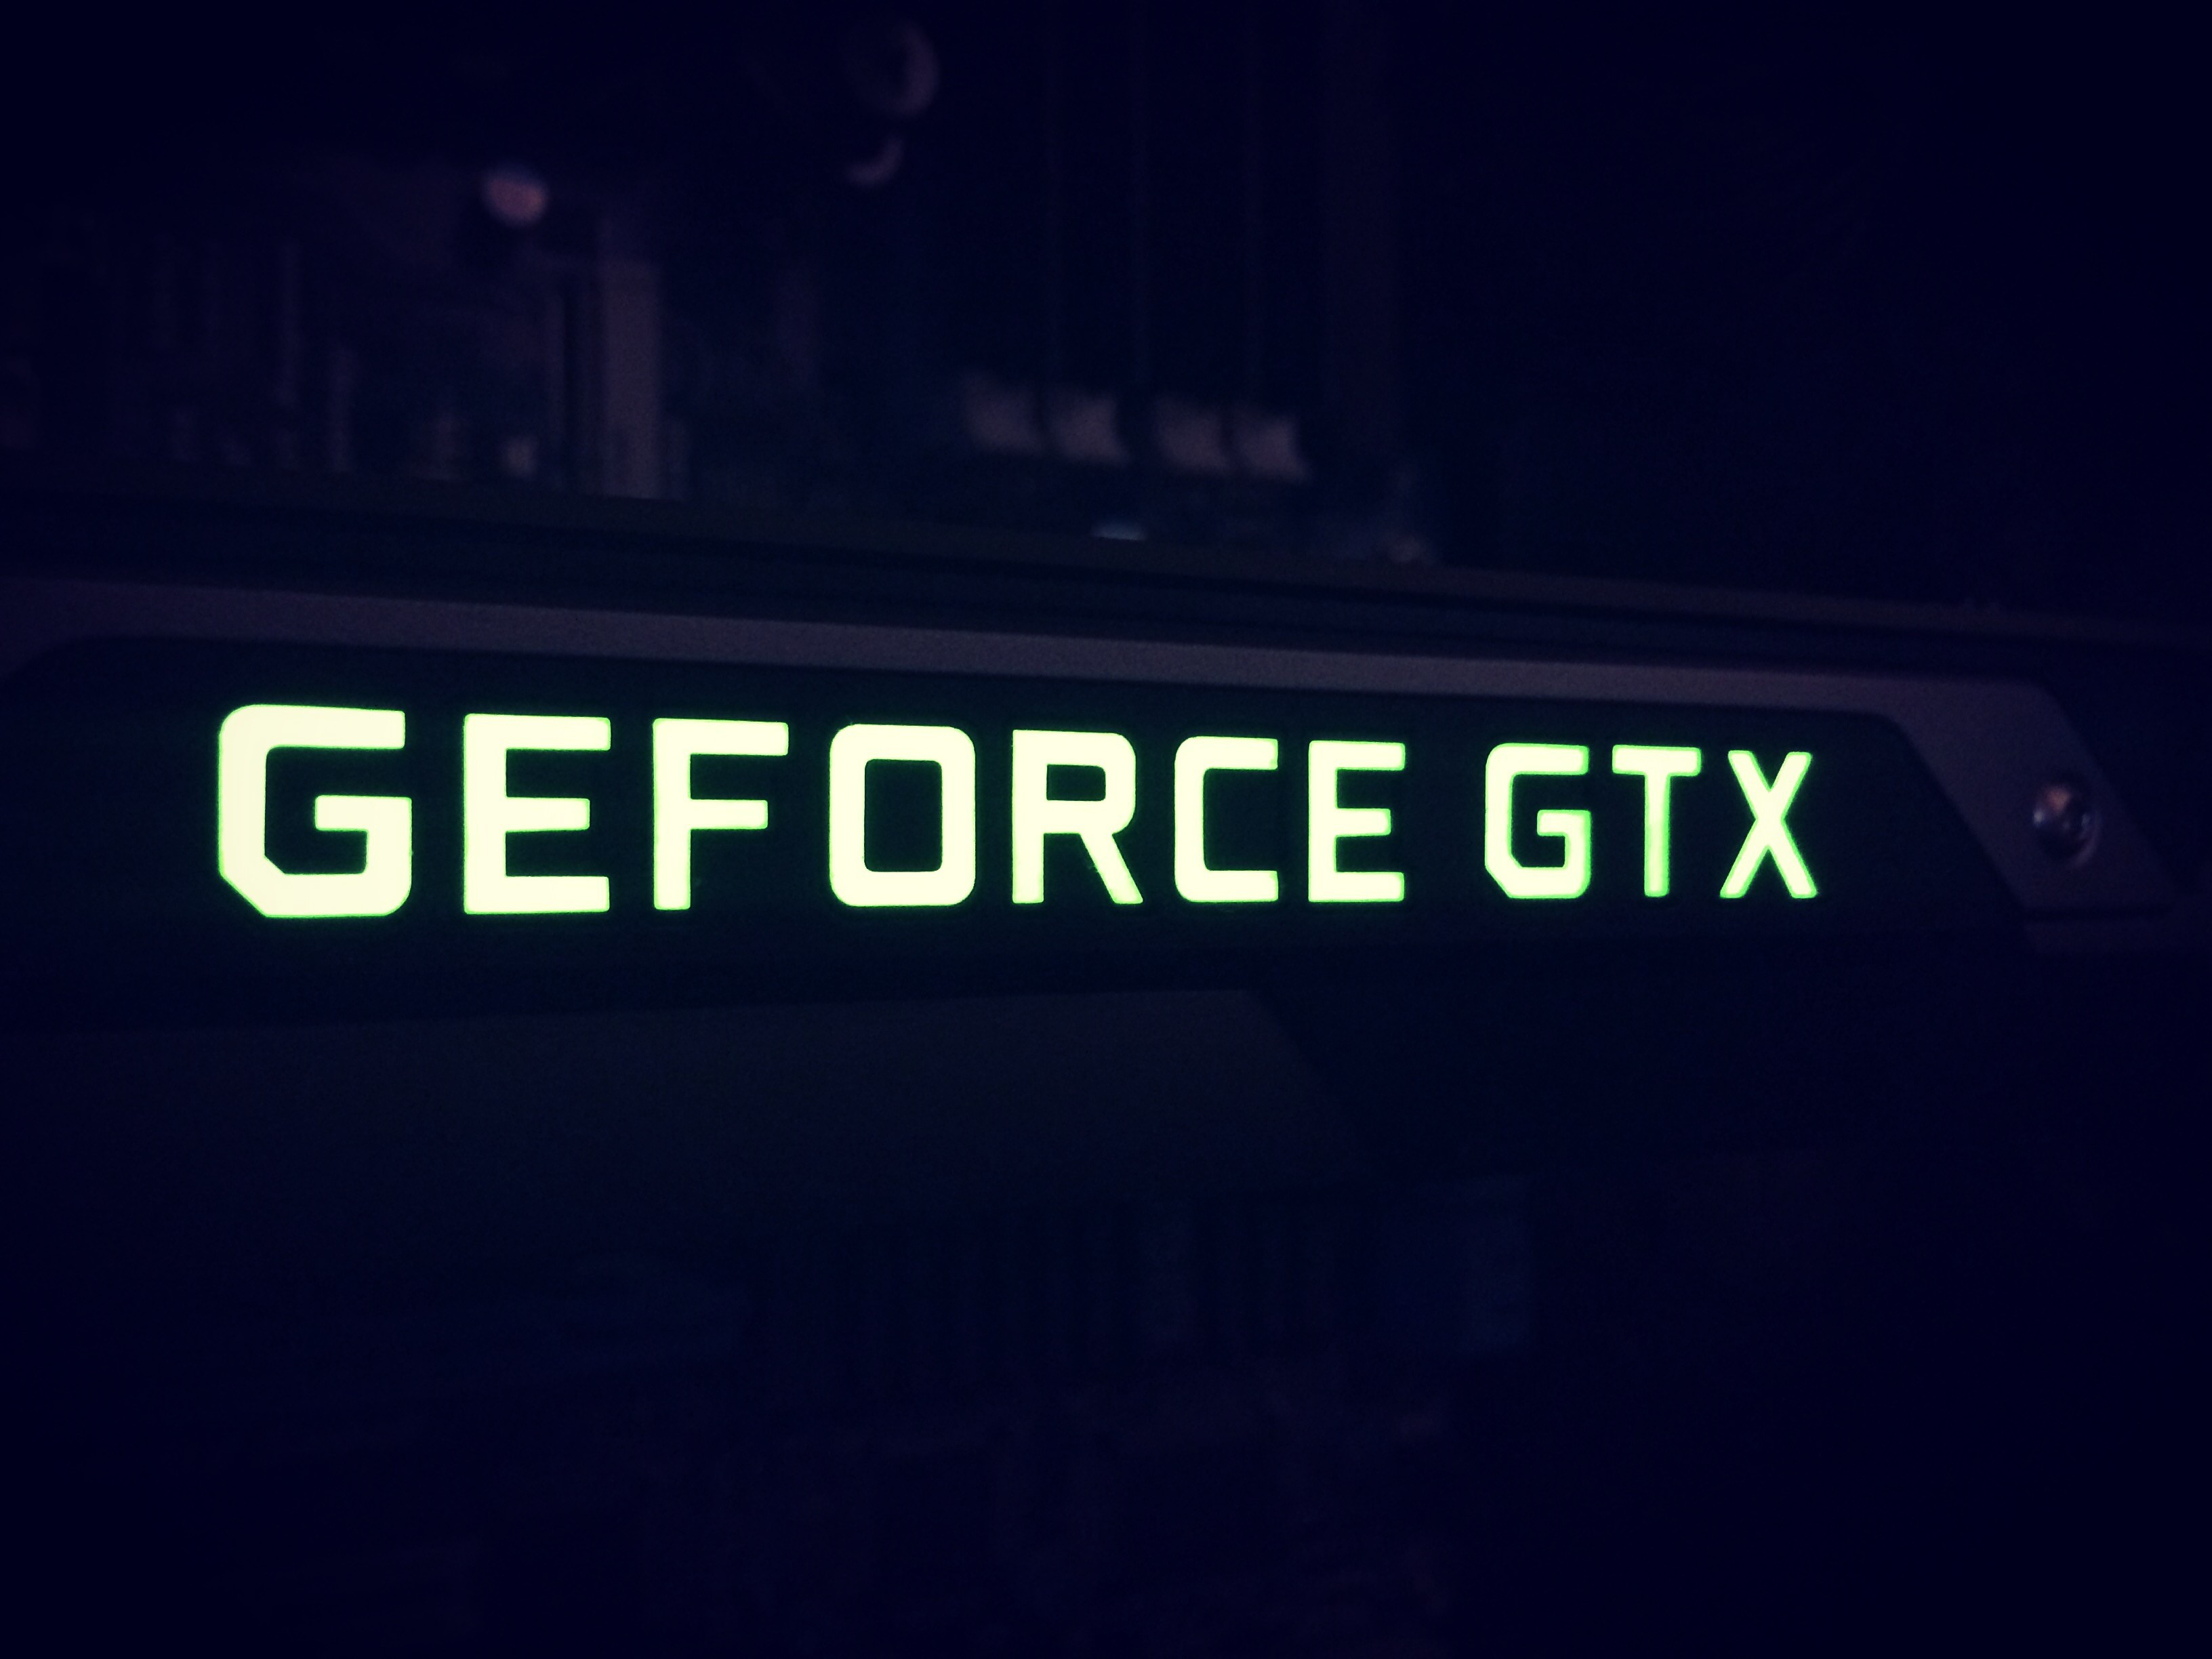 GeForce Simple Background Blue Background Graphics Card Nvidia Nvidia GTX PC Gaming 3264x2448